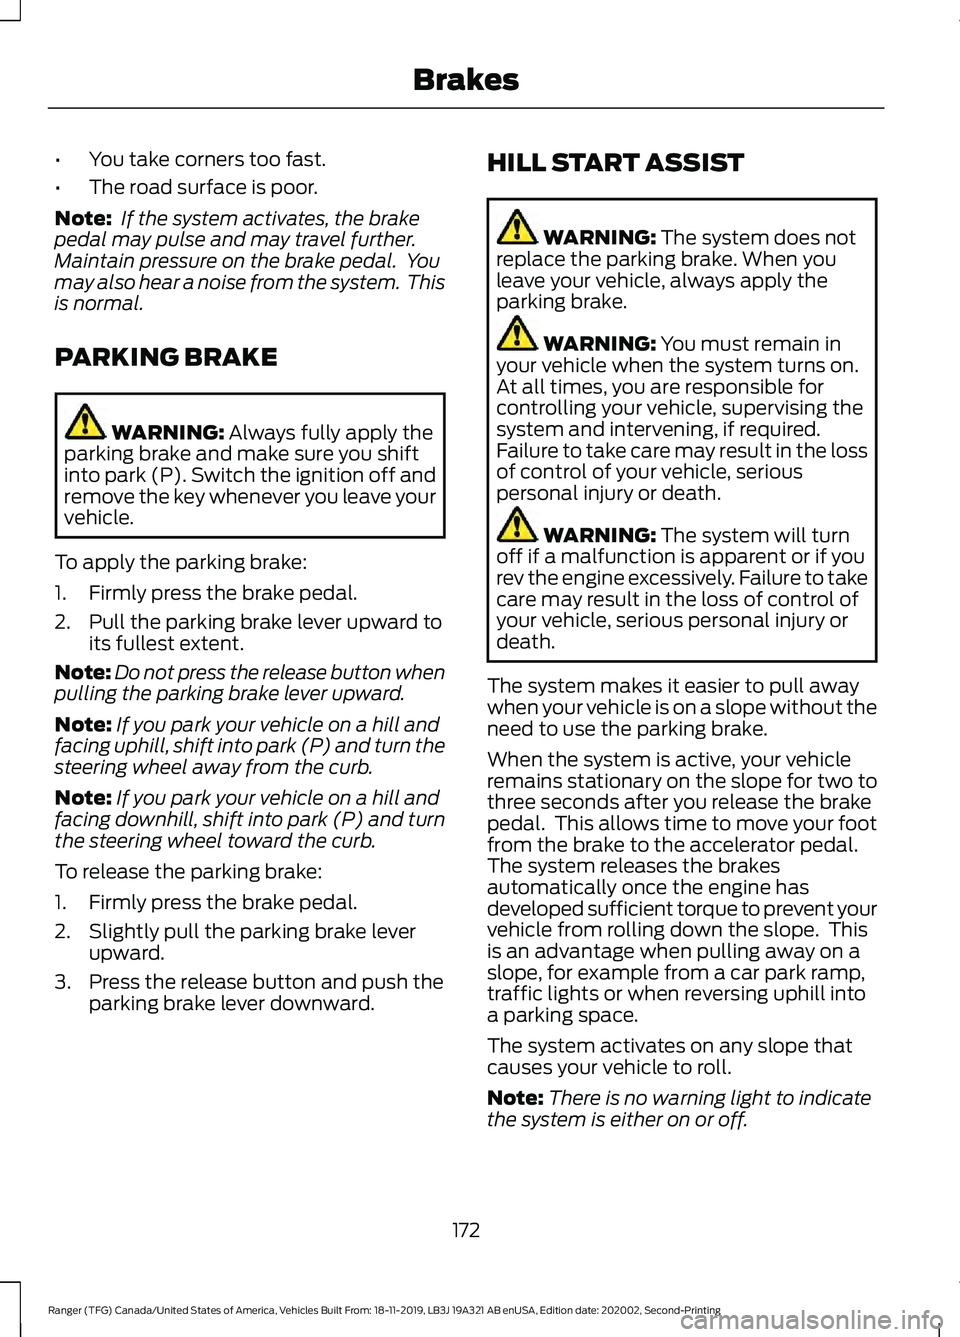 FORD RANGER 2020  Owners Manual •
You take corners too fast.
• The road surface is poor.
Note:  If the system activates, the brake
pedal may pulse and may travel further.
Maintain pressure on the brake pedal.  You
may also hear 